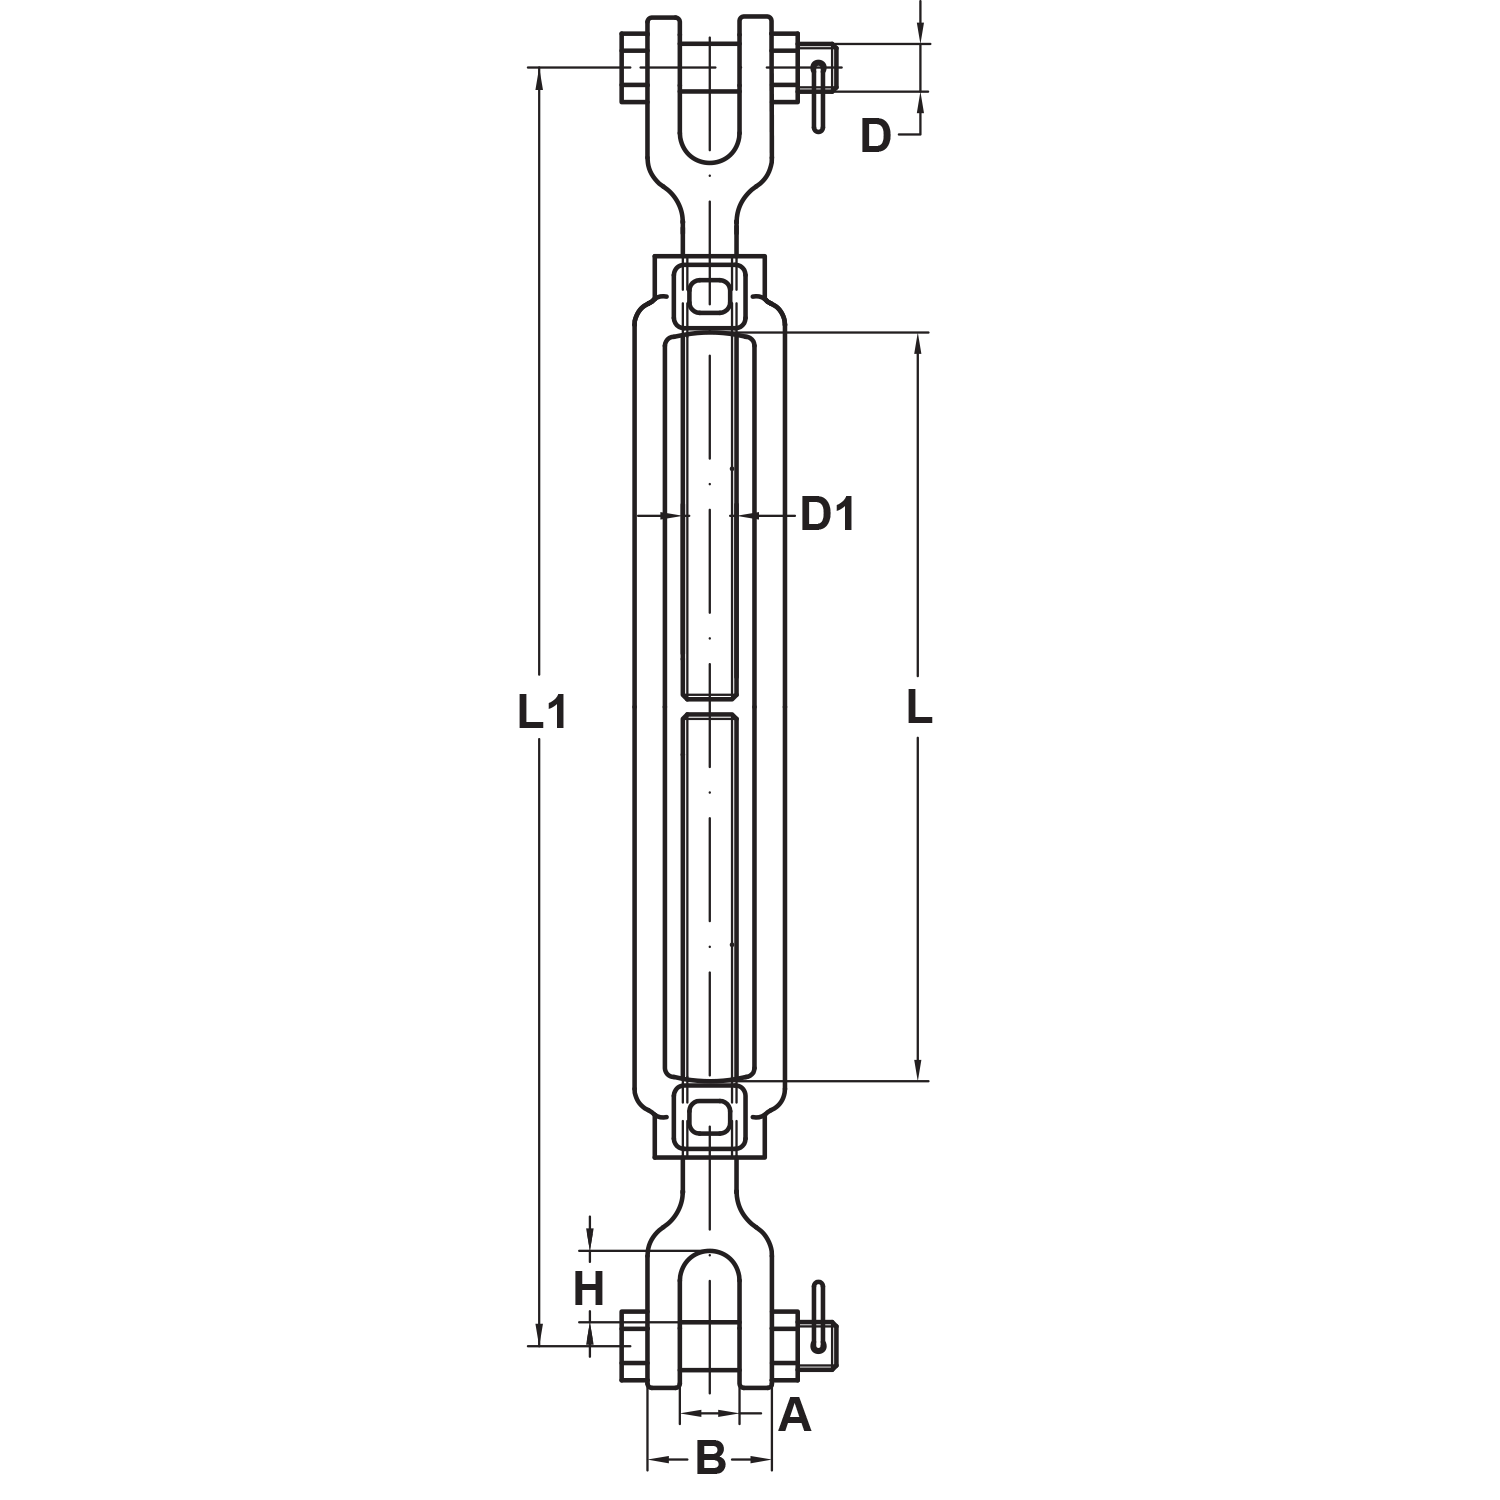 5-16-x-4-1-2-stainless-steel-jaw-jaw-turnbuckle-us-type-diagram